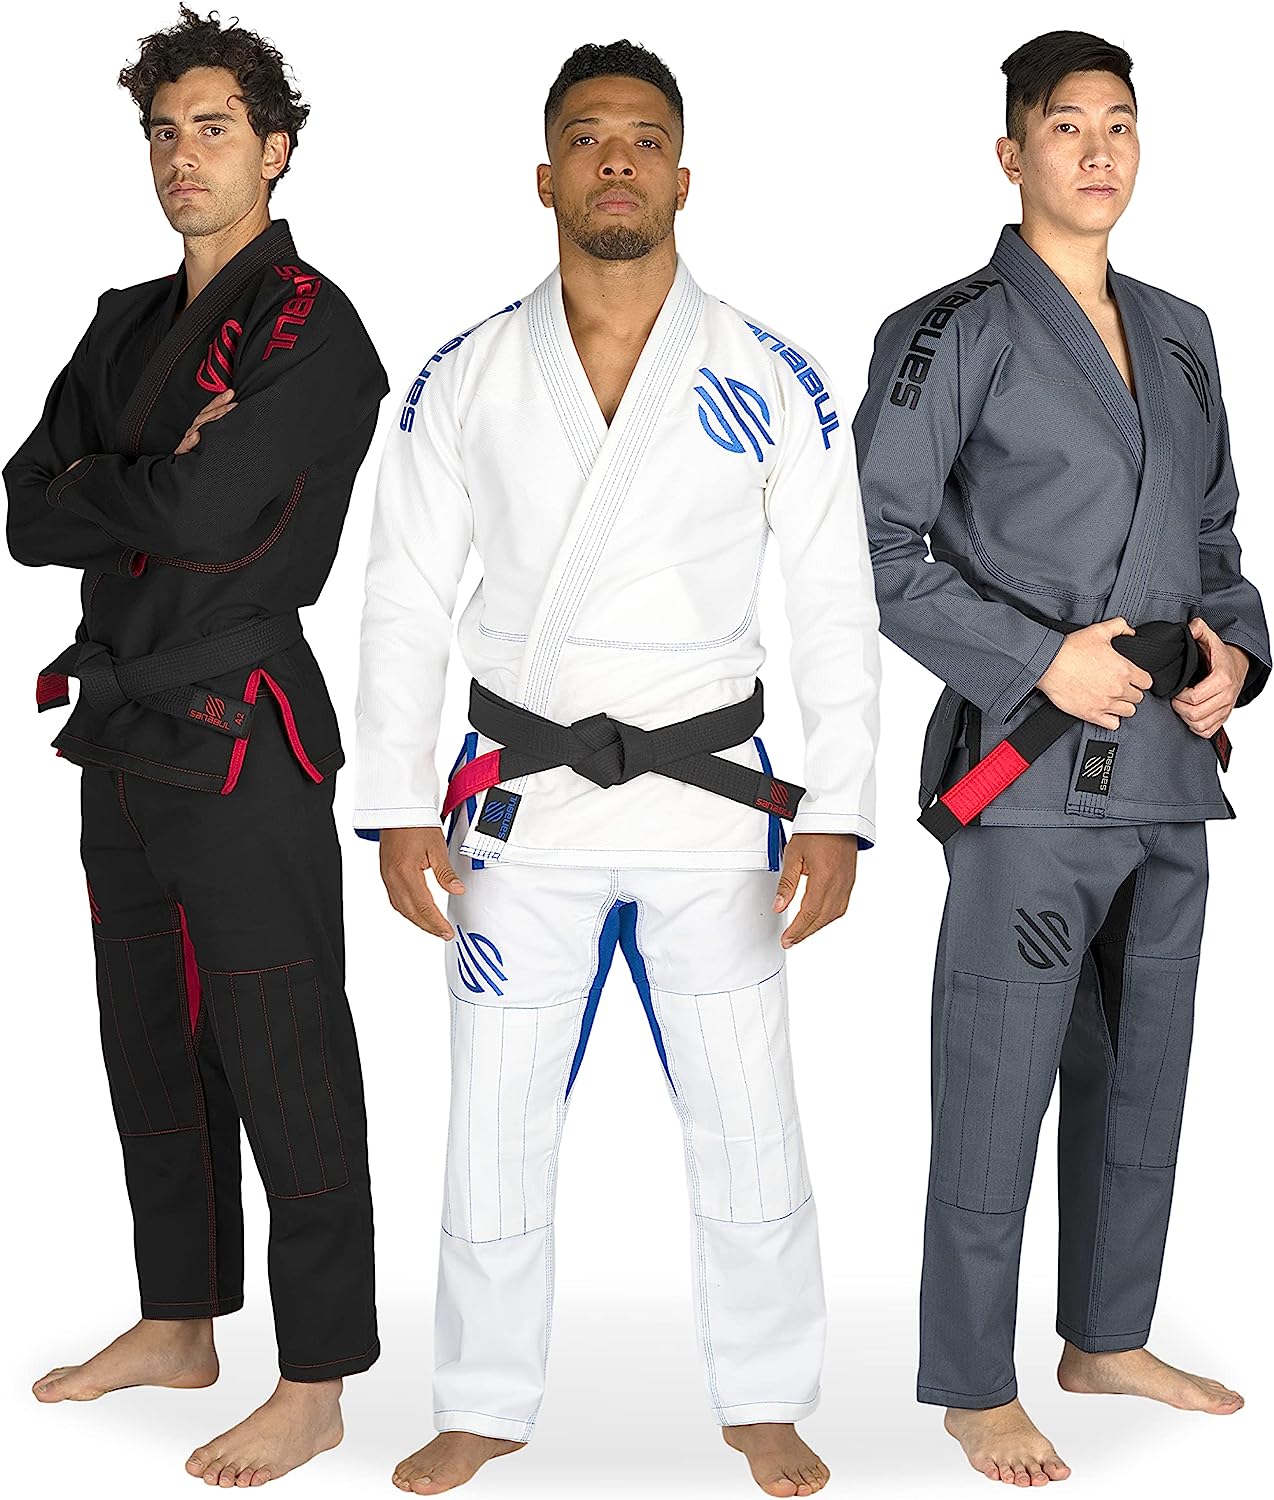 A gi for tall guys, showcasing the best long and slim design intended for a comfortable fit for skinny guys pursuing martial arts.